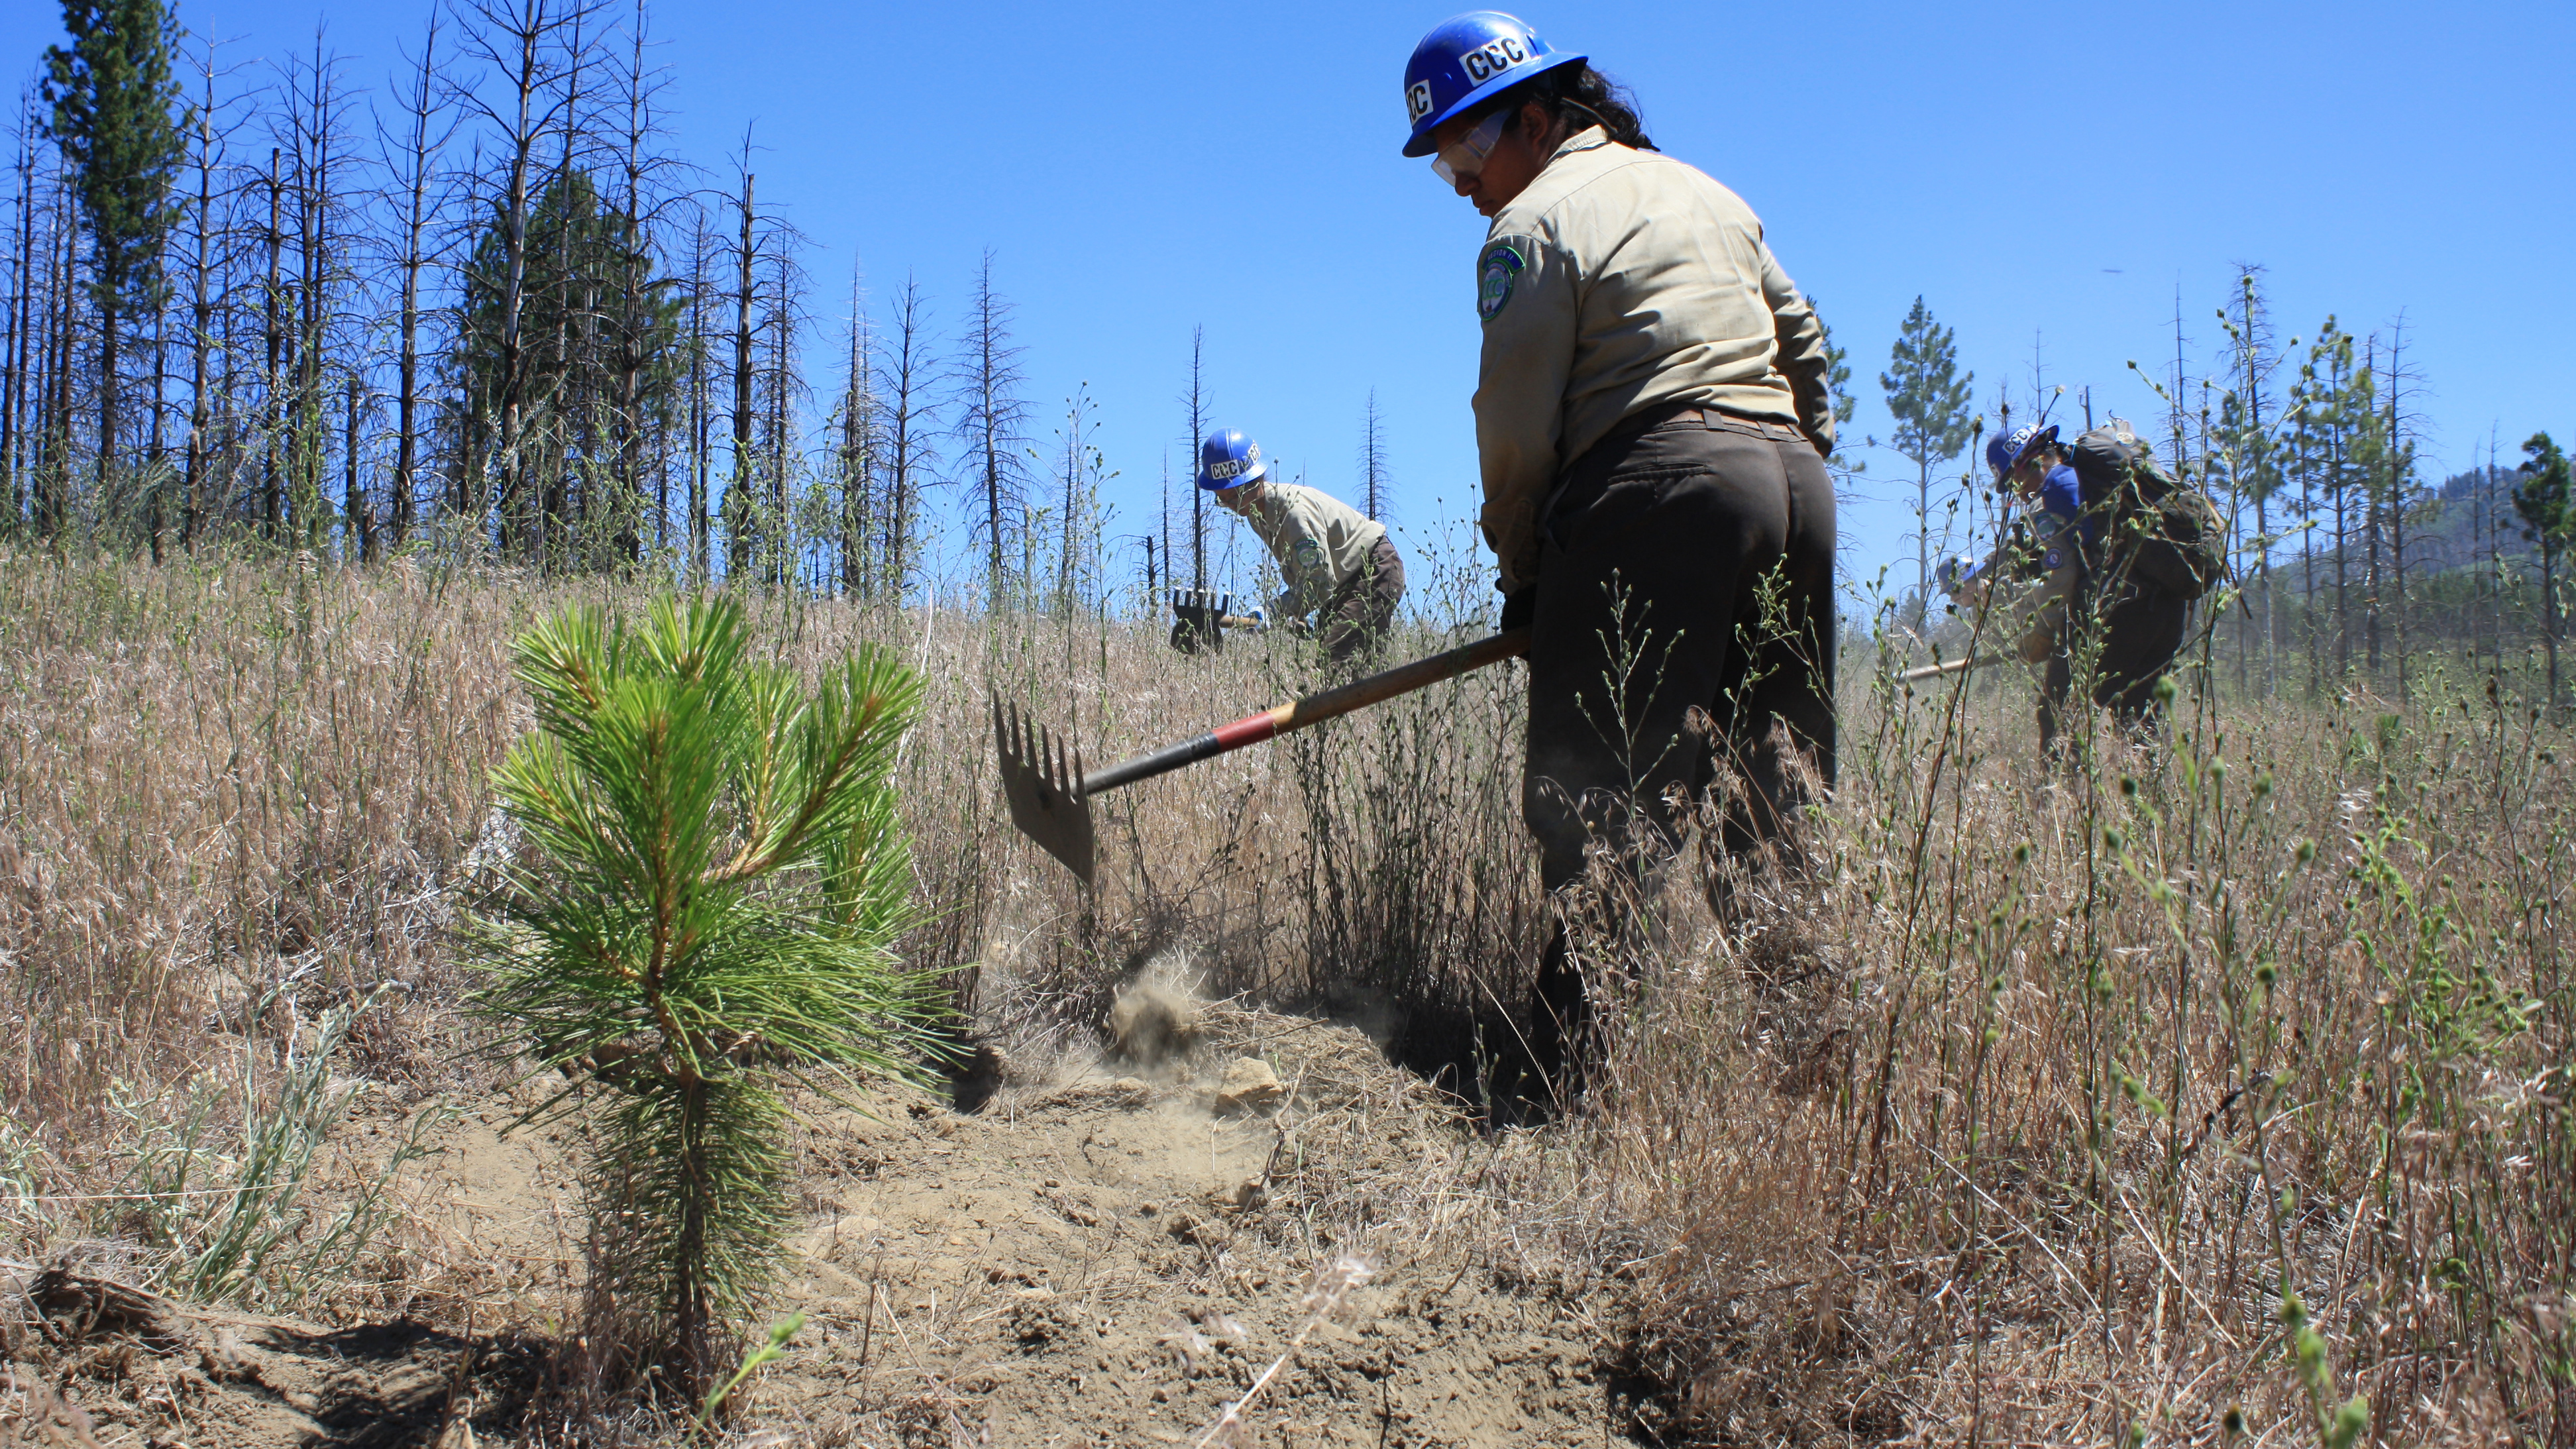 Image. Young conifer in foreground of image, with female Corpsmember using McLeod in background clearing brush.